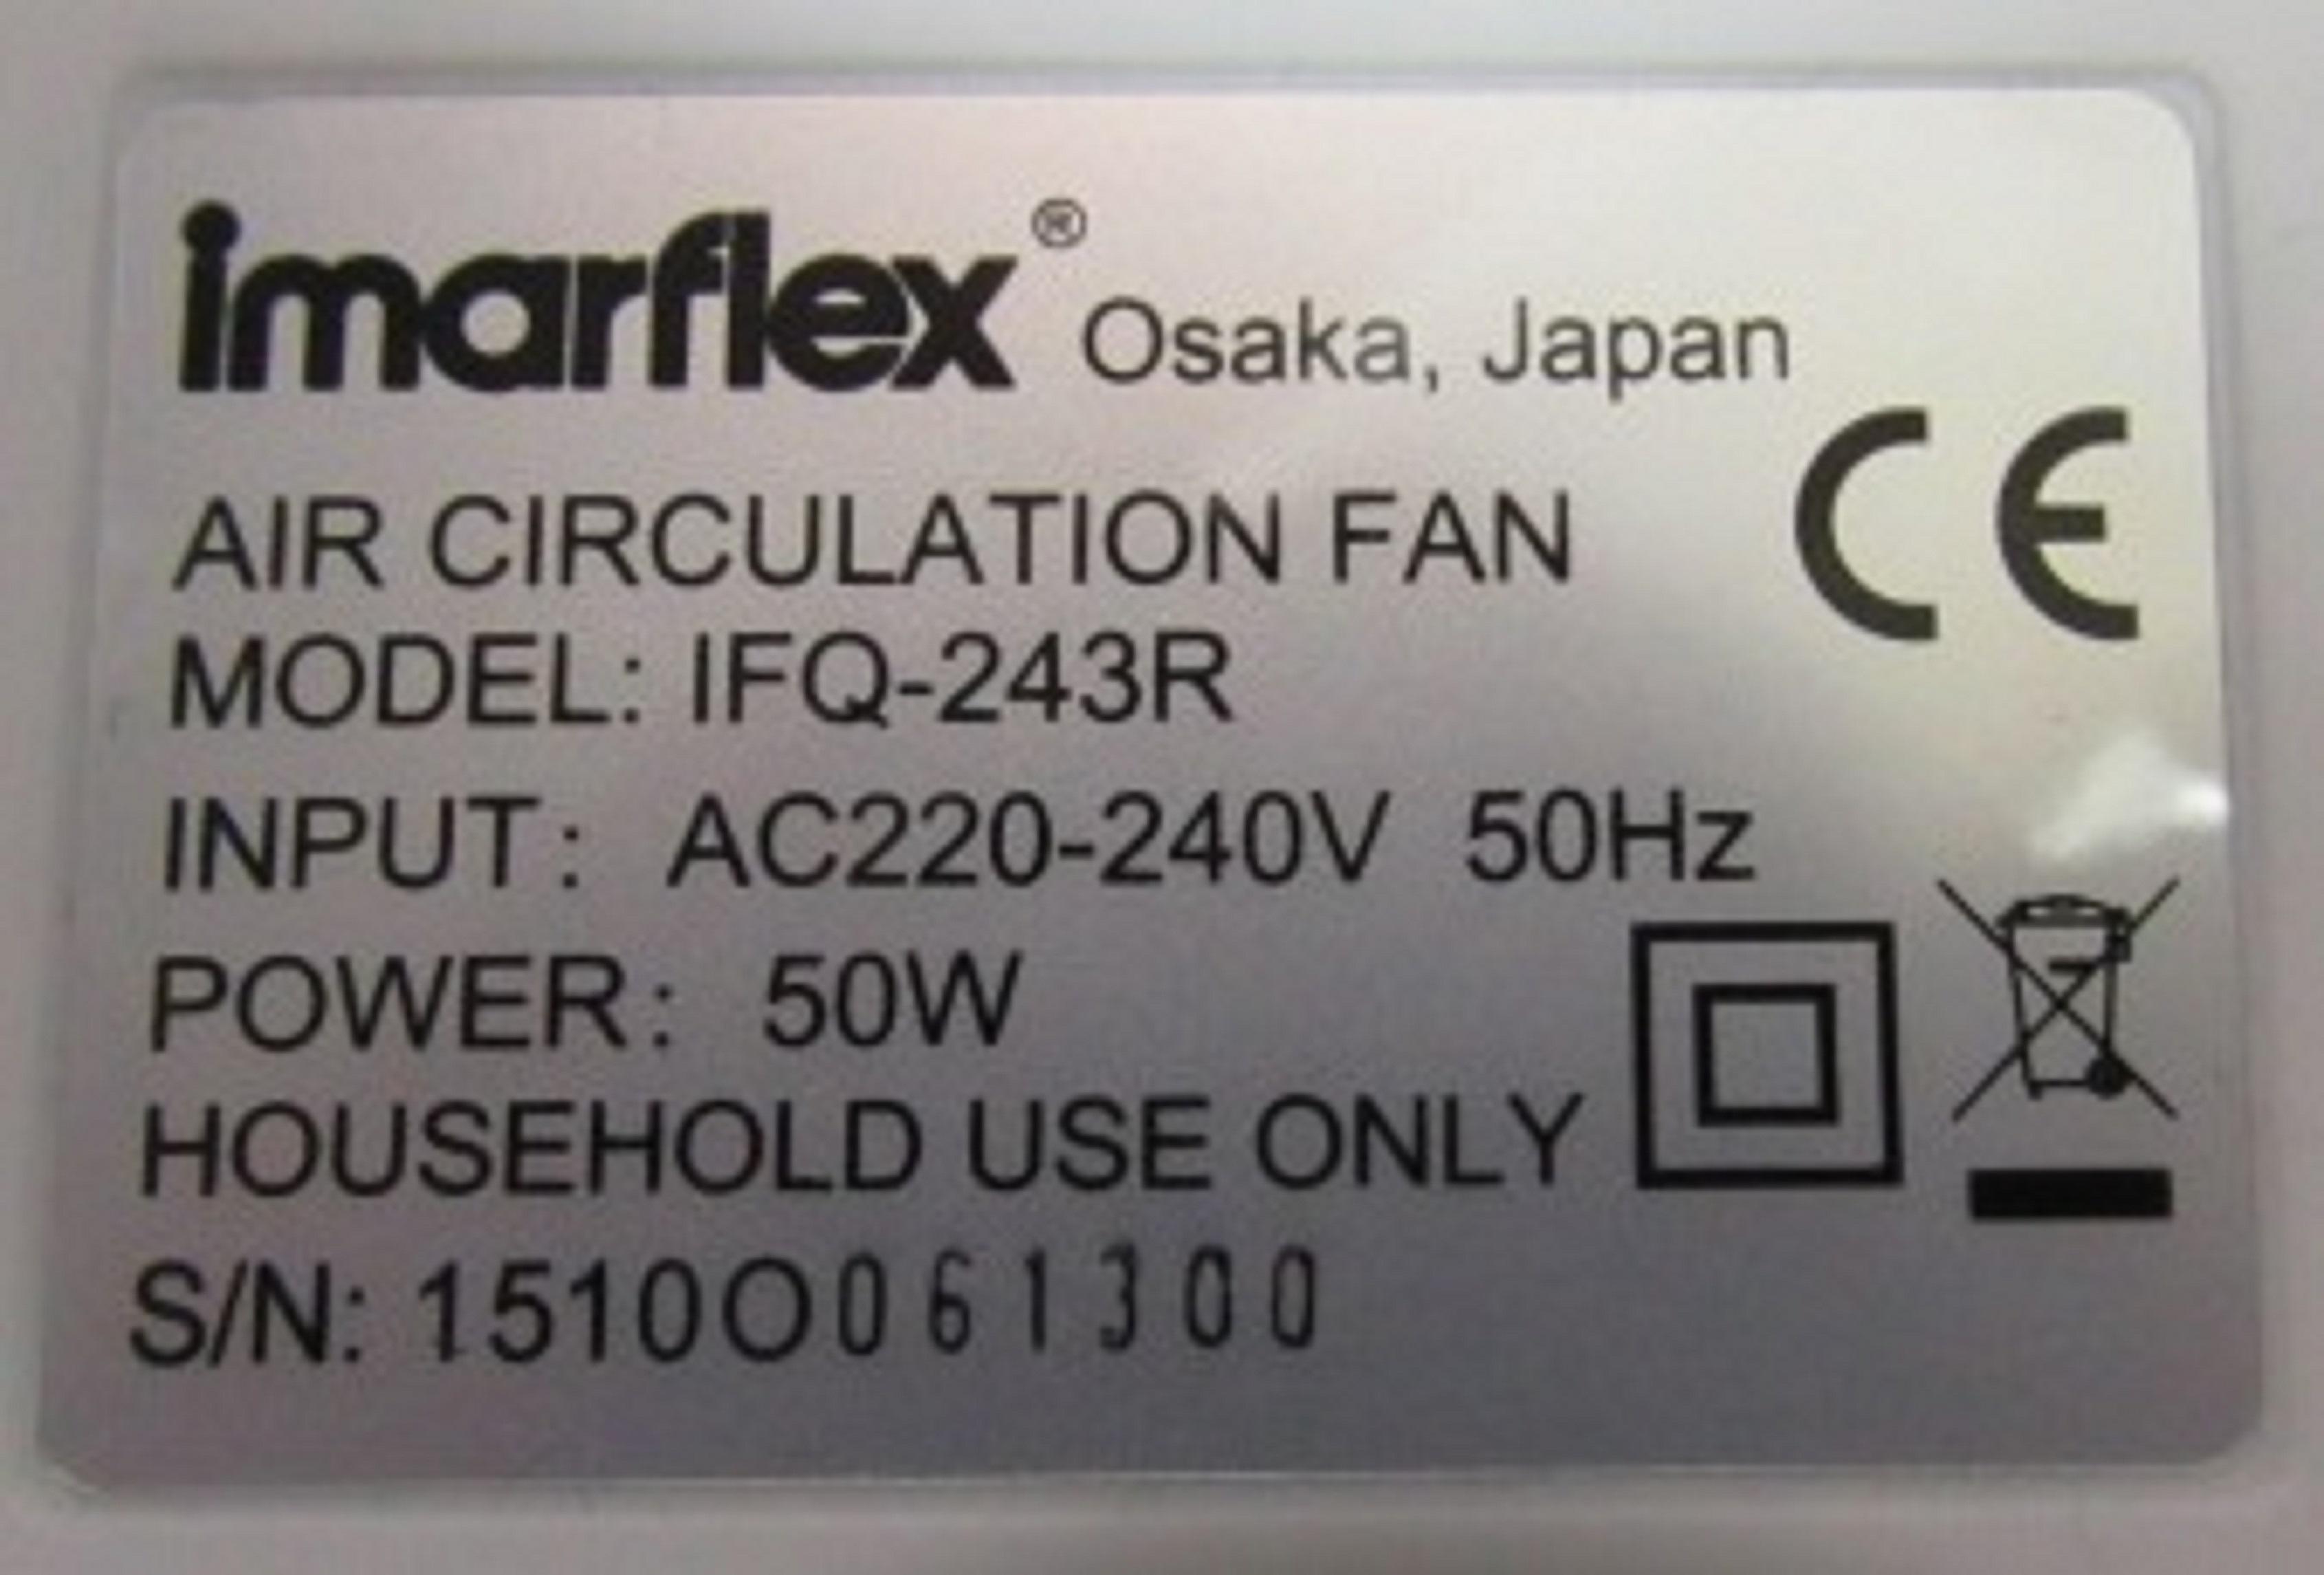 The Electrical and Mechanical Services Department today (June 14) urged the public to stop using a model of an Imarflex air circulator fan with the model number IFQ-243R. Photo shows its product markings.